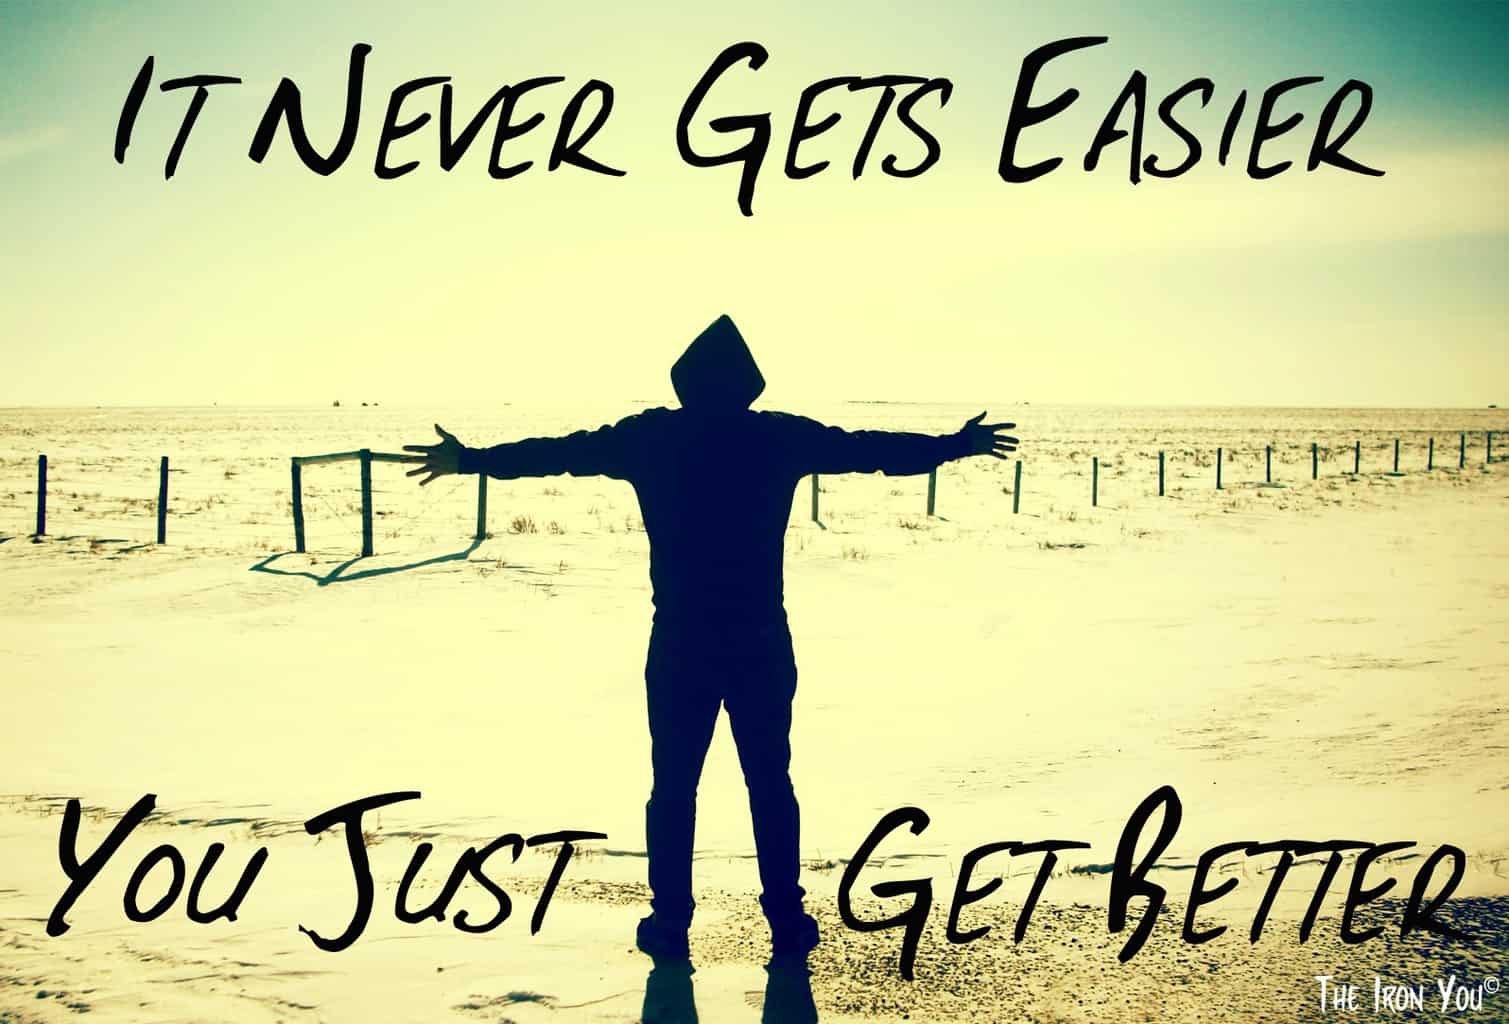 easier never better gets quotes act sat test does fitness than think matter motivation training fact inspirational resistance program jogging